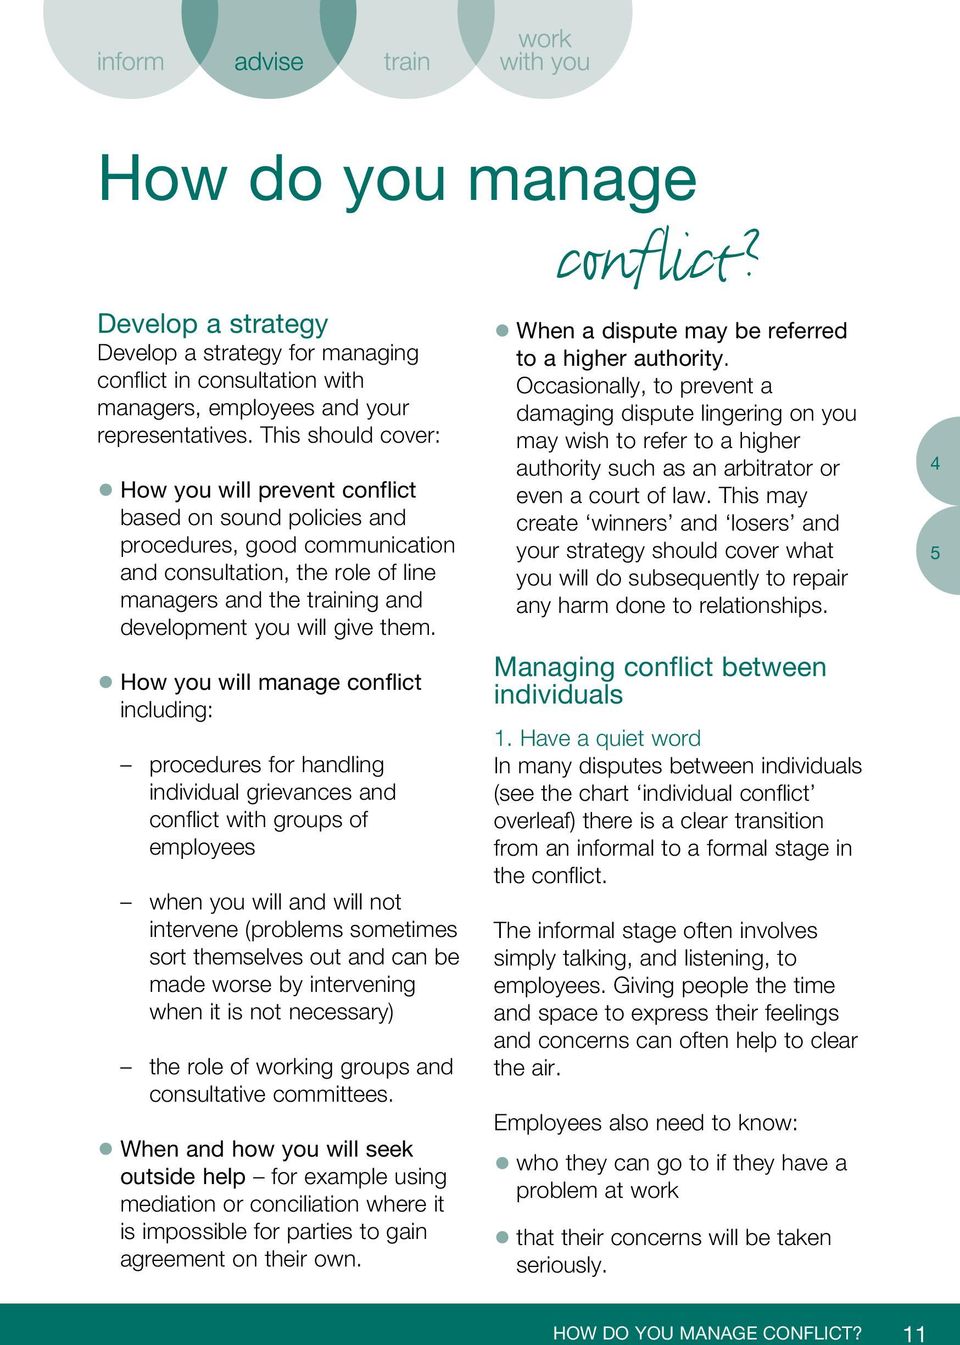 them. How you will manage conflict including: procedures for handling individual grievances and conflict with groups of employees when you will and will not intervene (problems sometimes sort